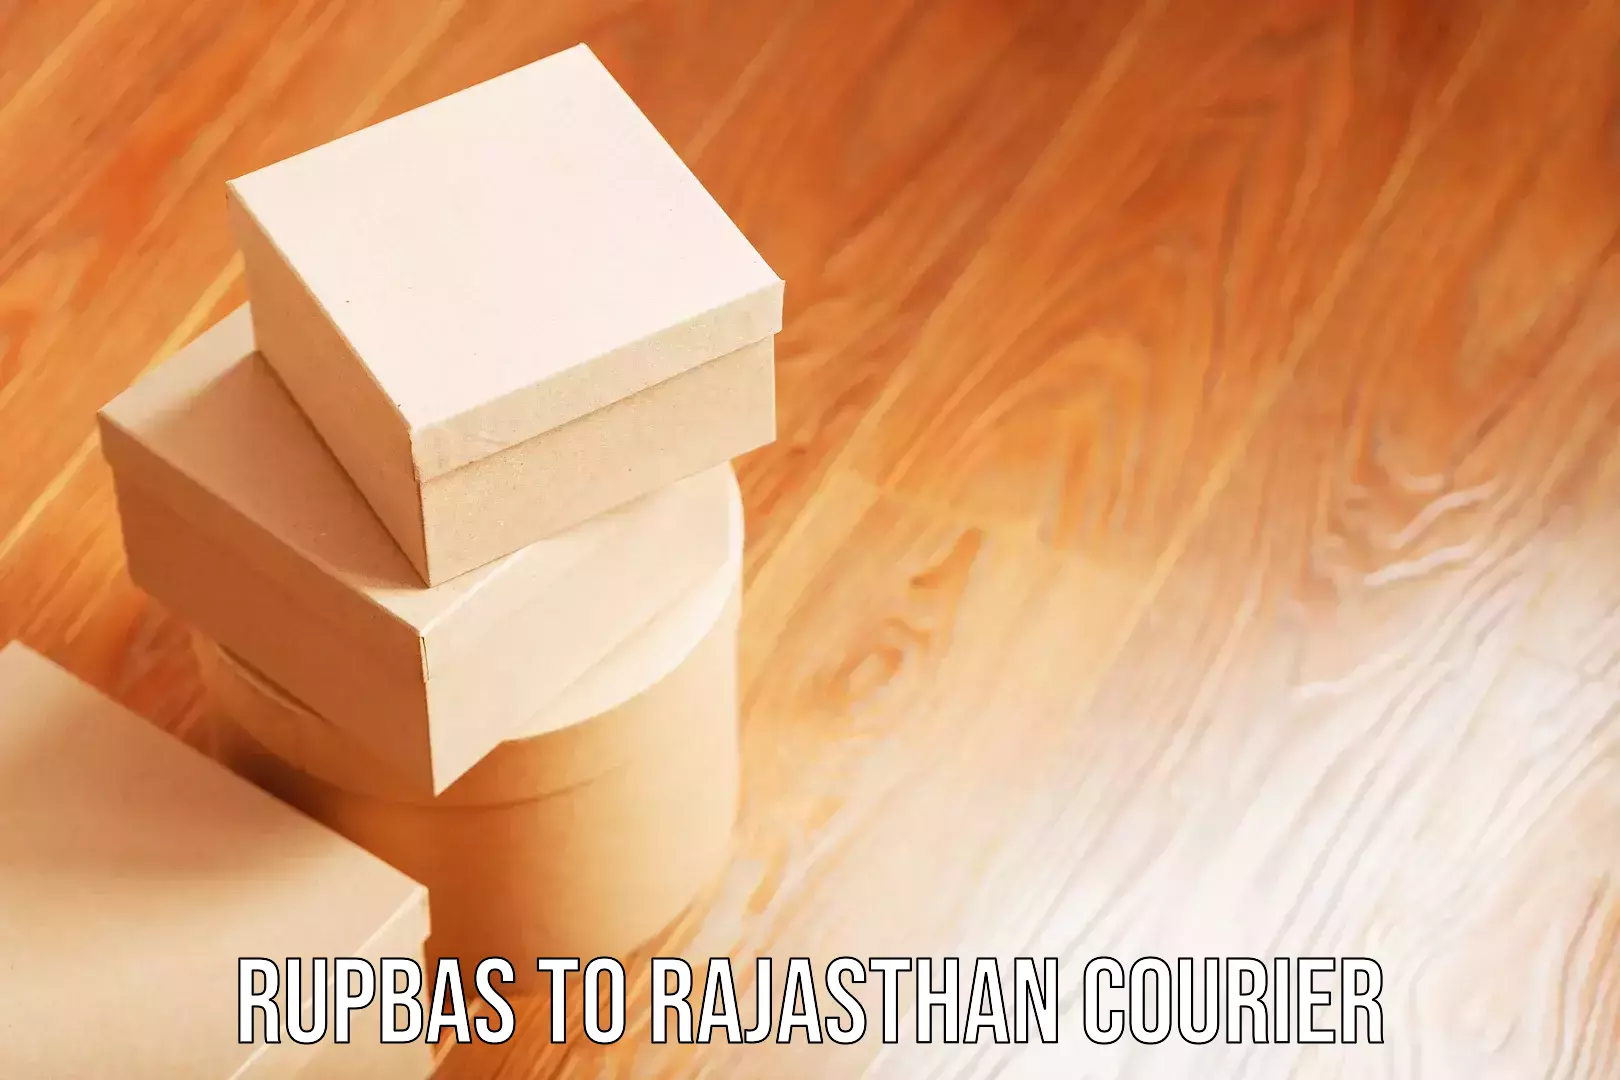 Express baggage shipping Rupbas to Sultana